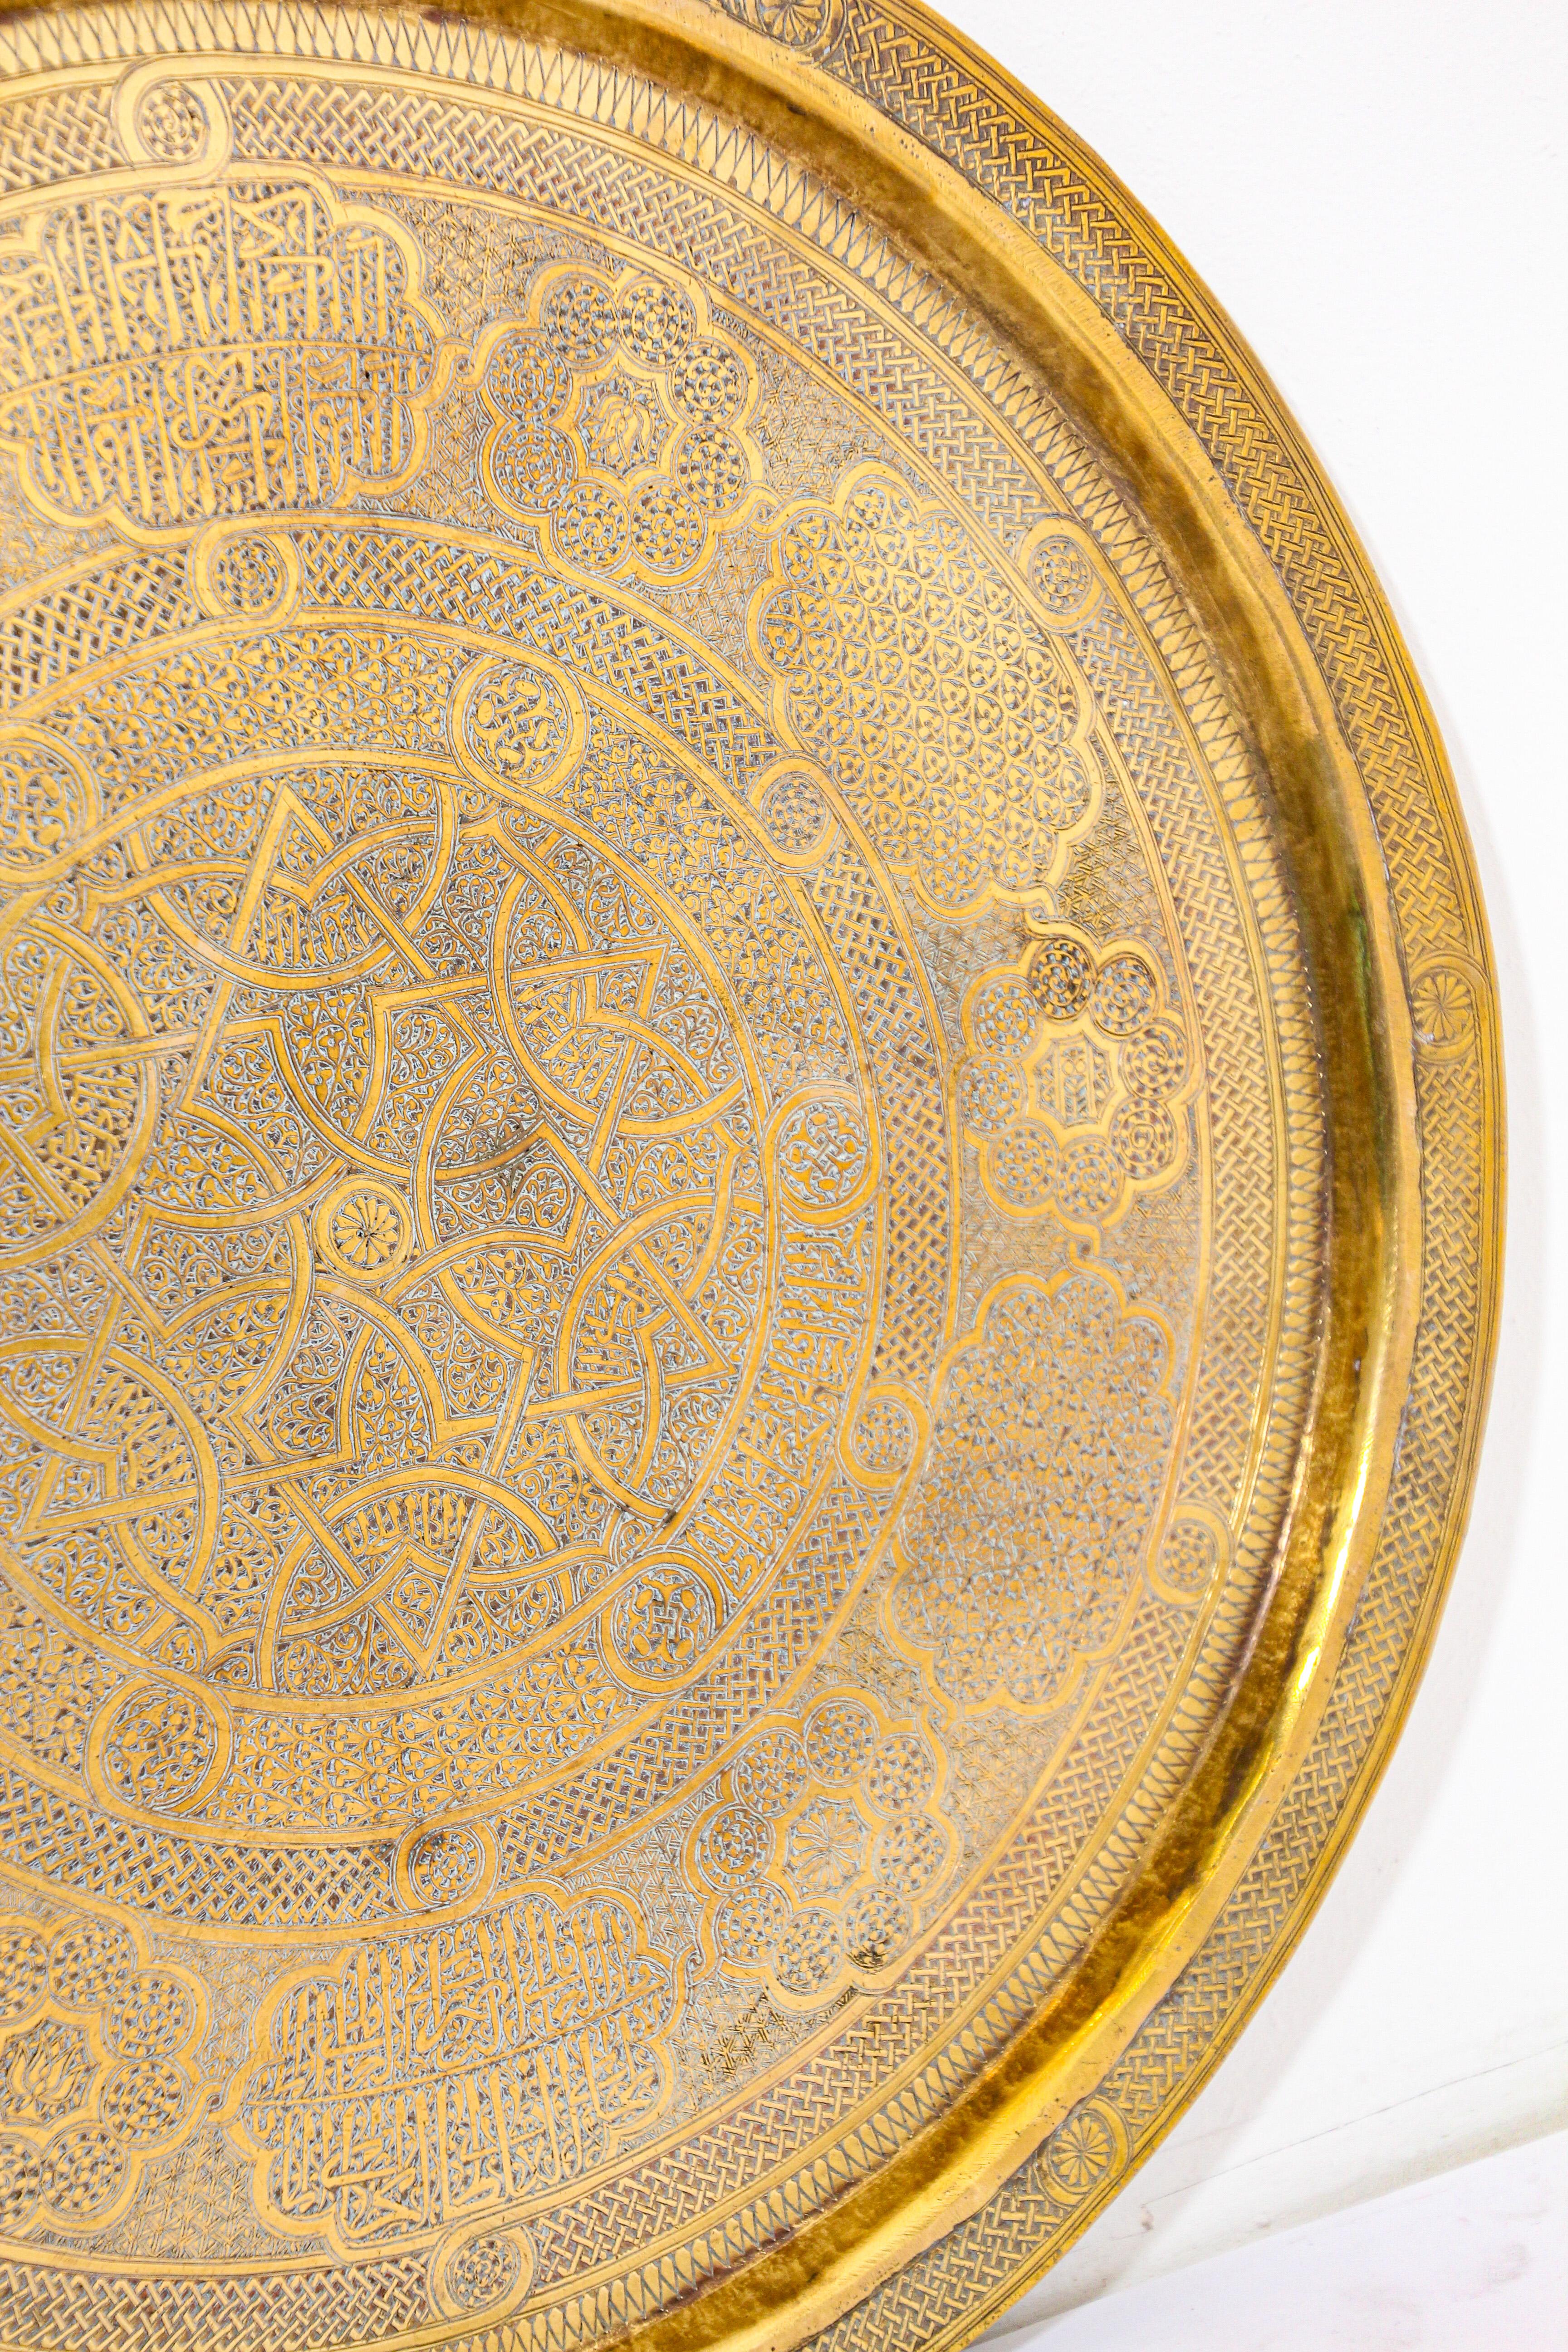 Mughal India Round Brass Tray with Islamic Writing For Sale 9